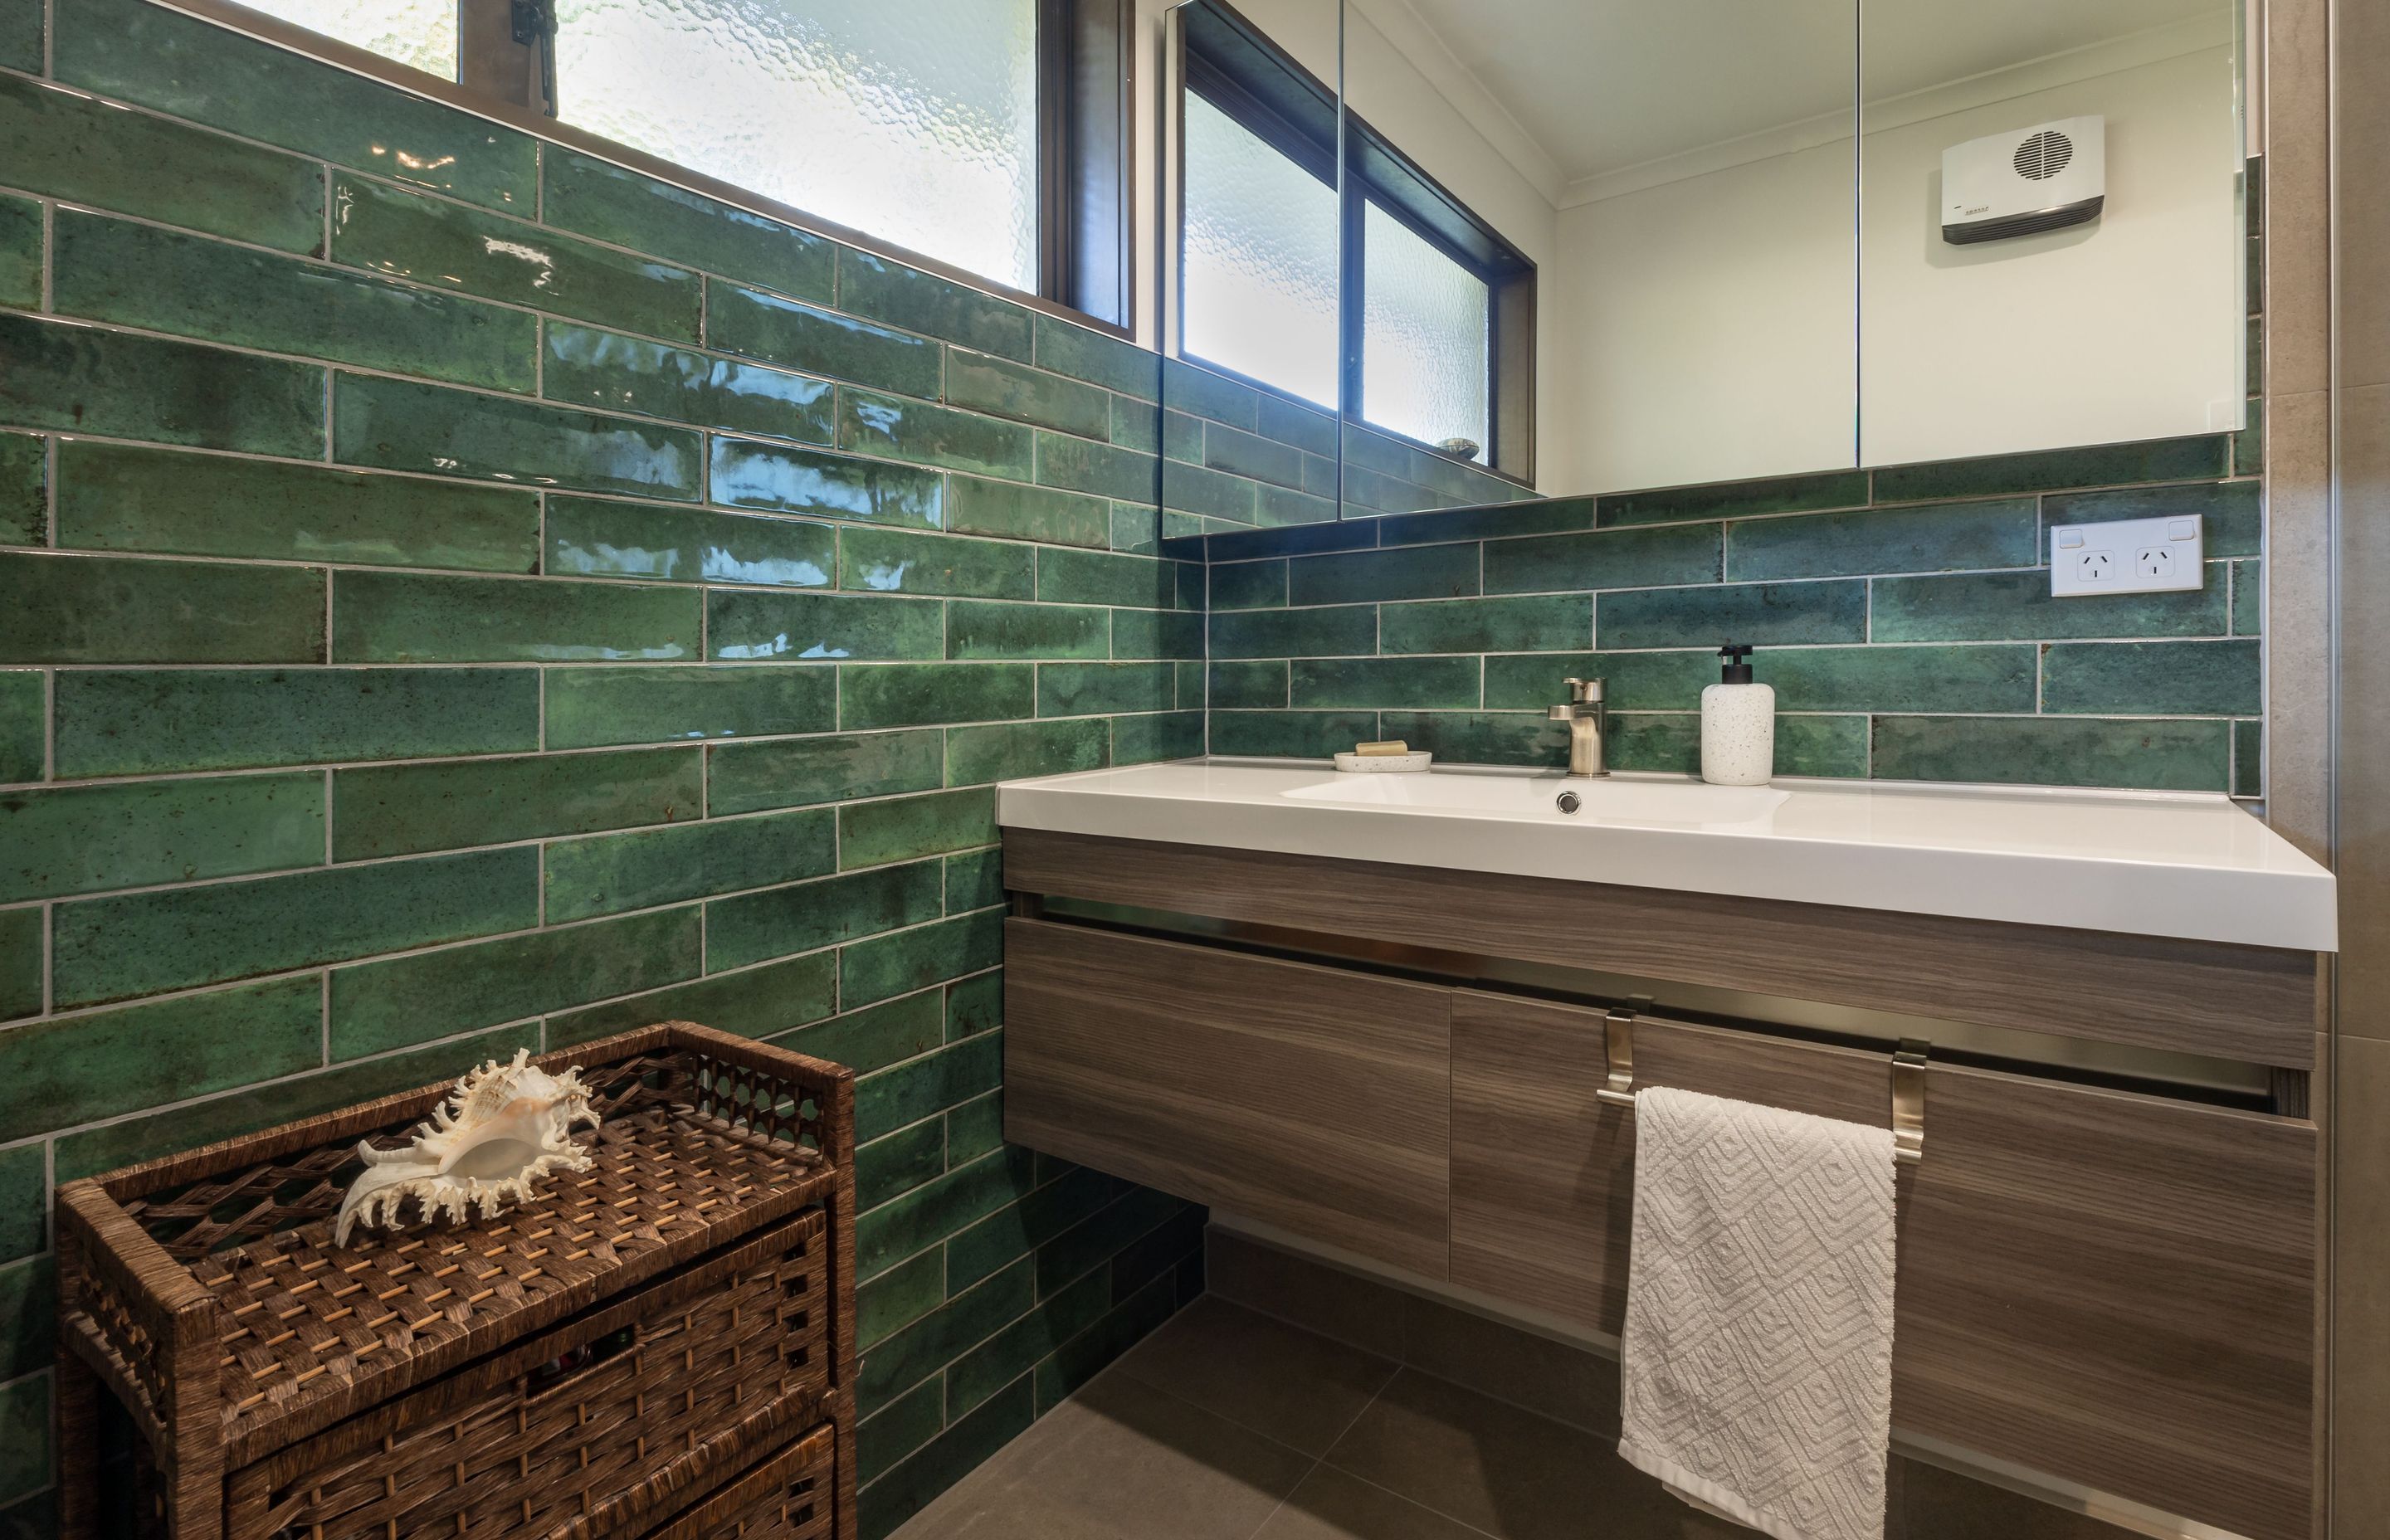 Transforming an Outdated Bathroom into a Relaxing and Luxurious Space